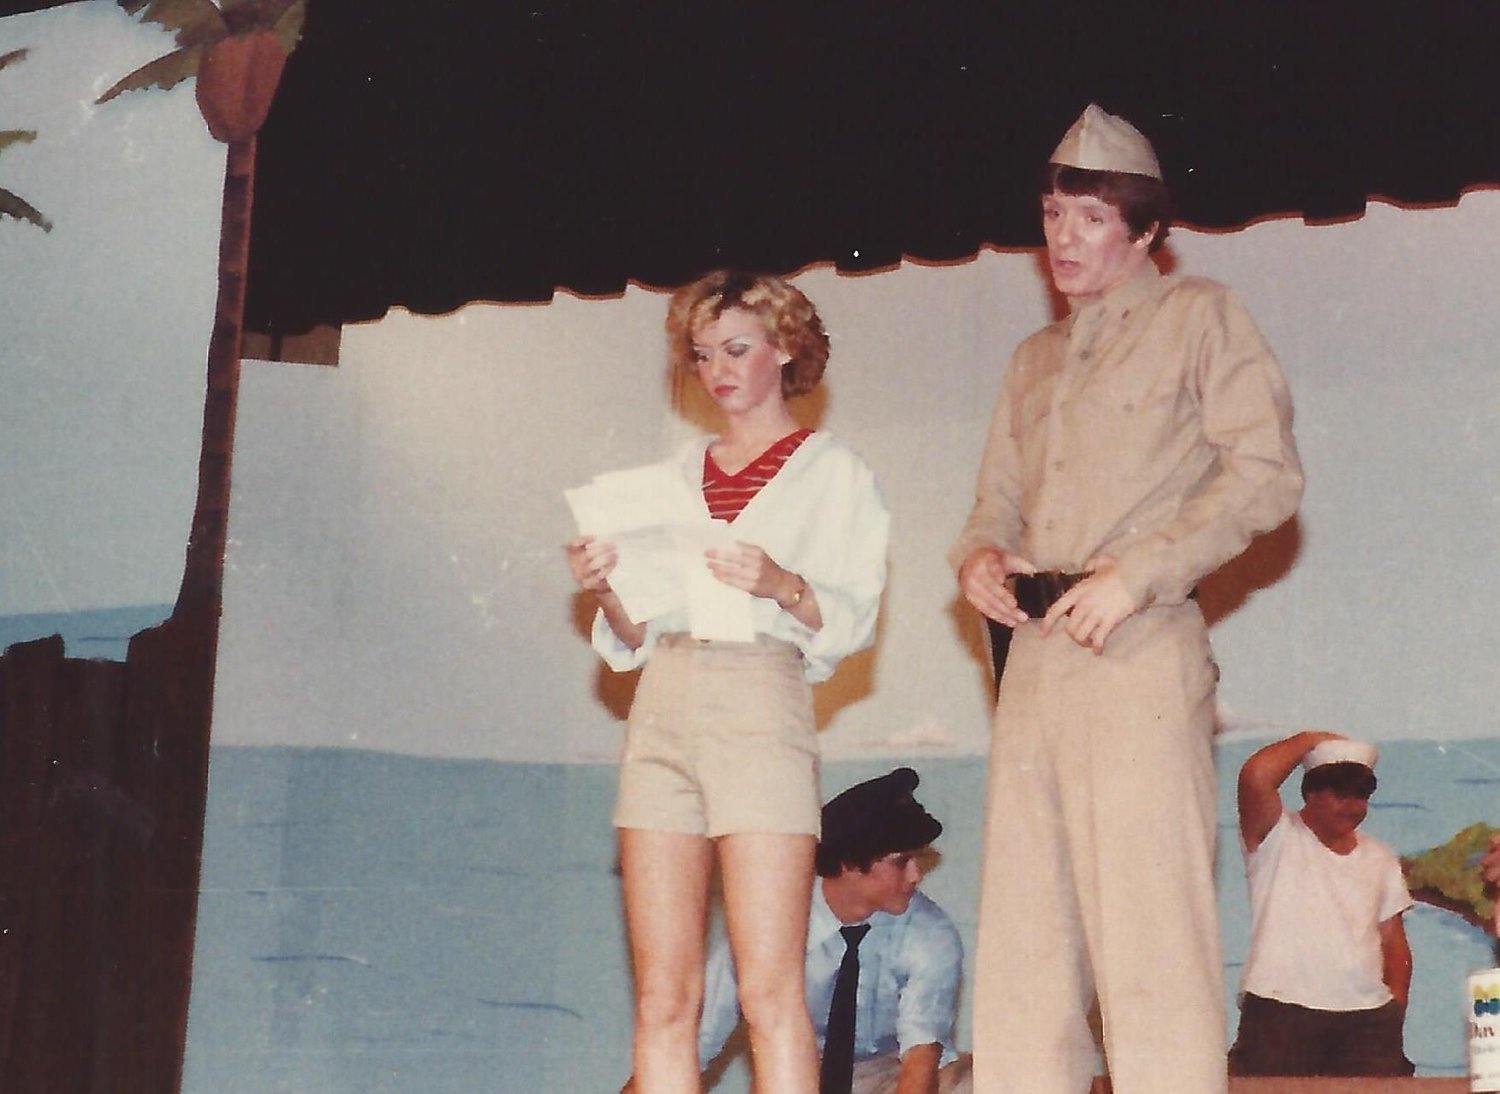 Winona (Lawson) Whitaker as Nellie Forbush and Andrew Moritz as Lt. Joseph Cable in Centerville High School's production of "South Pacific" in 1981,